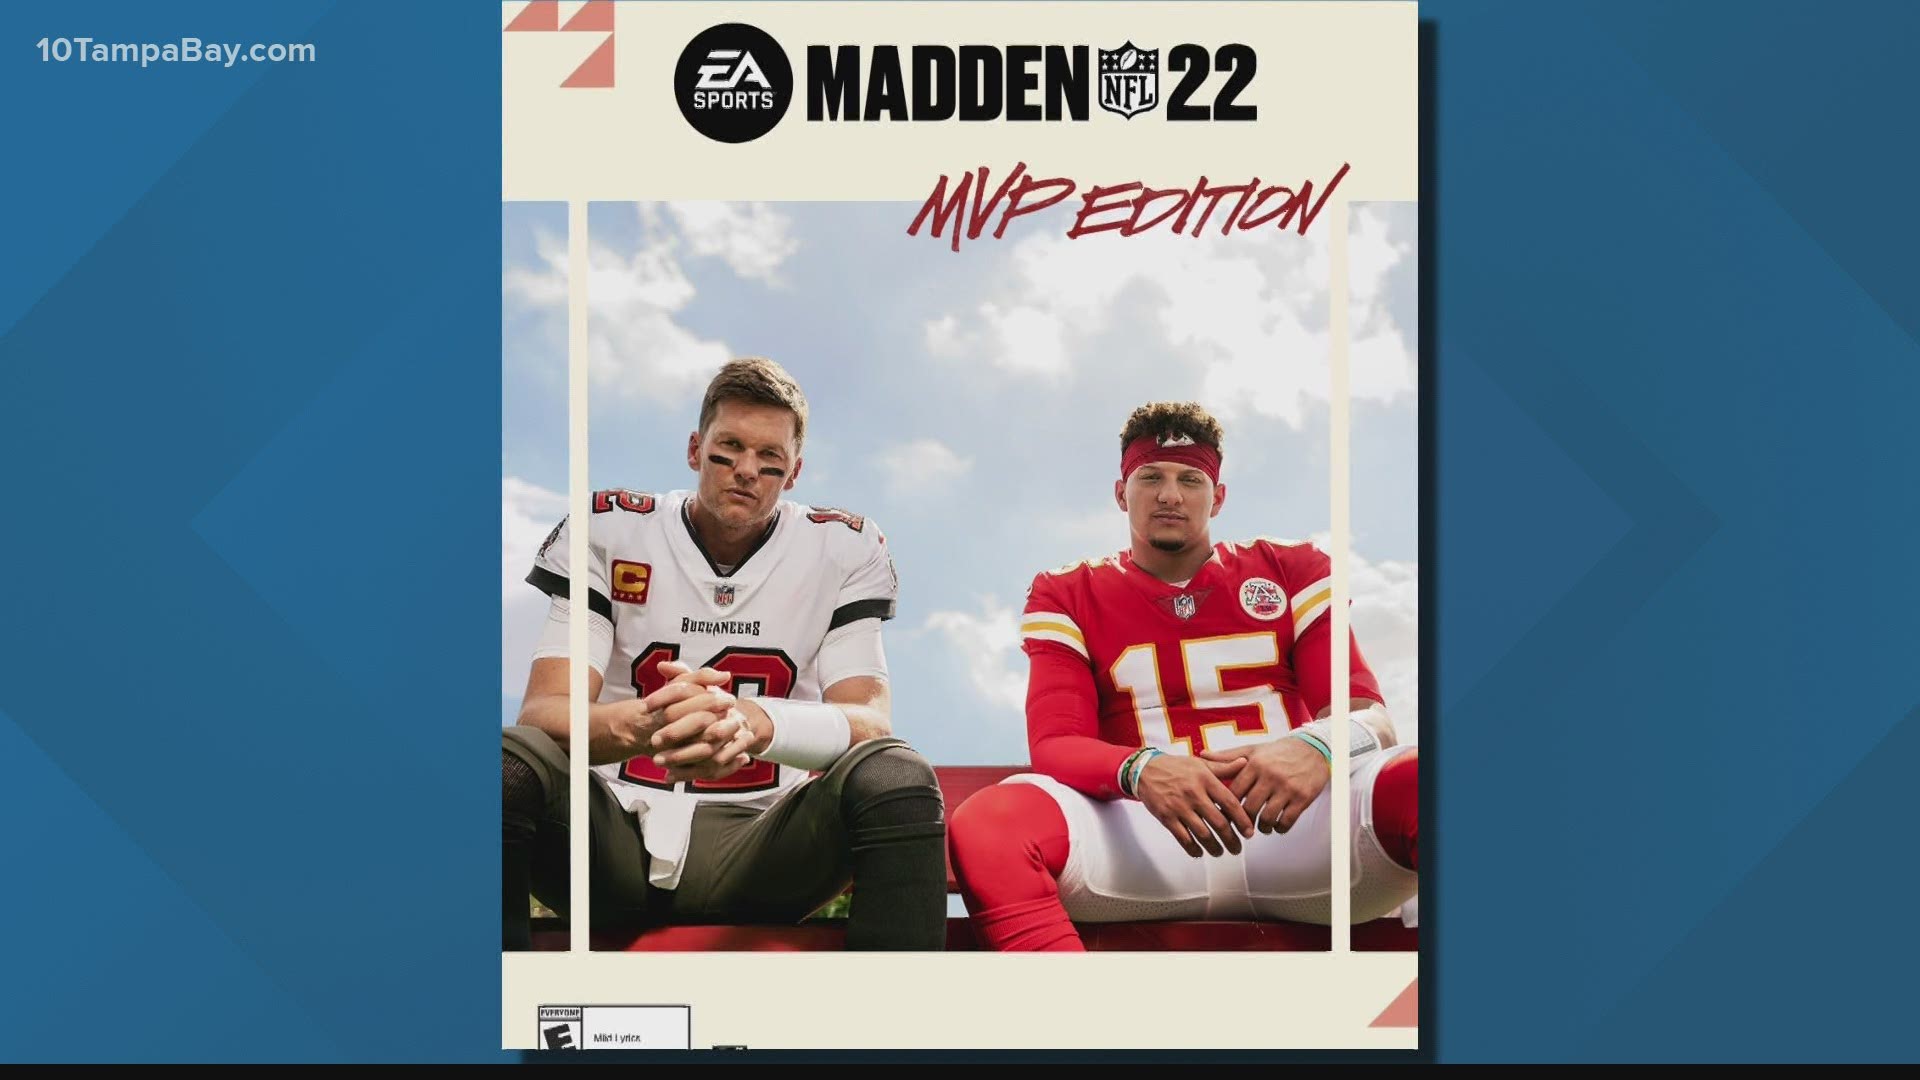 madden nfl 22 player ratings electronic arts